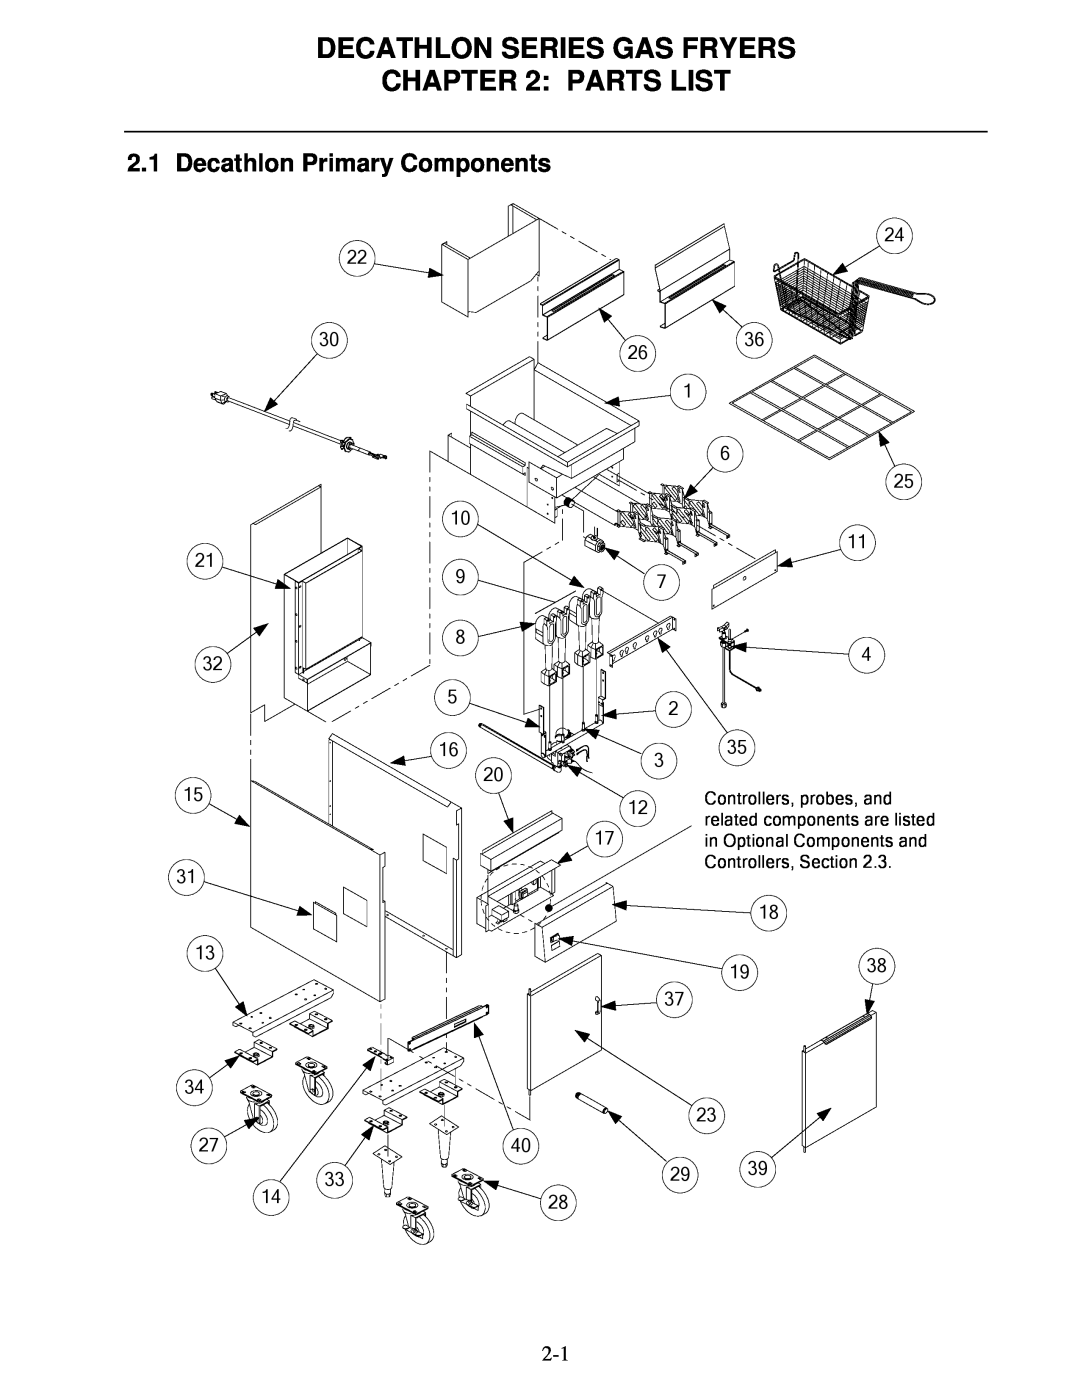 Frymaster FPD, SCFD manual Decathlon Series Gas Fryers : Parts List, Decathlon Primary Components 